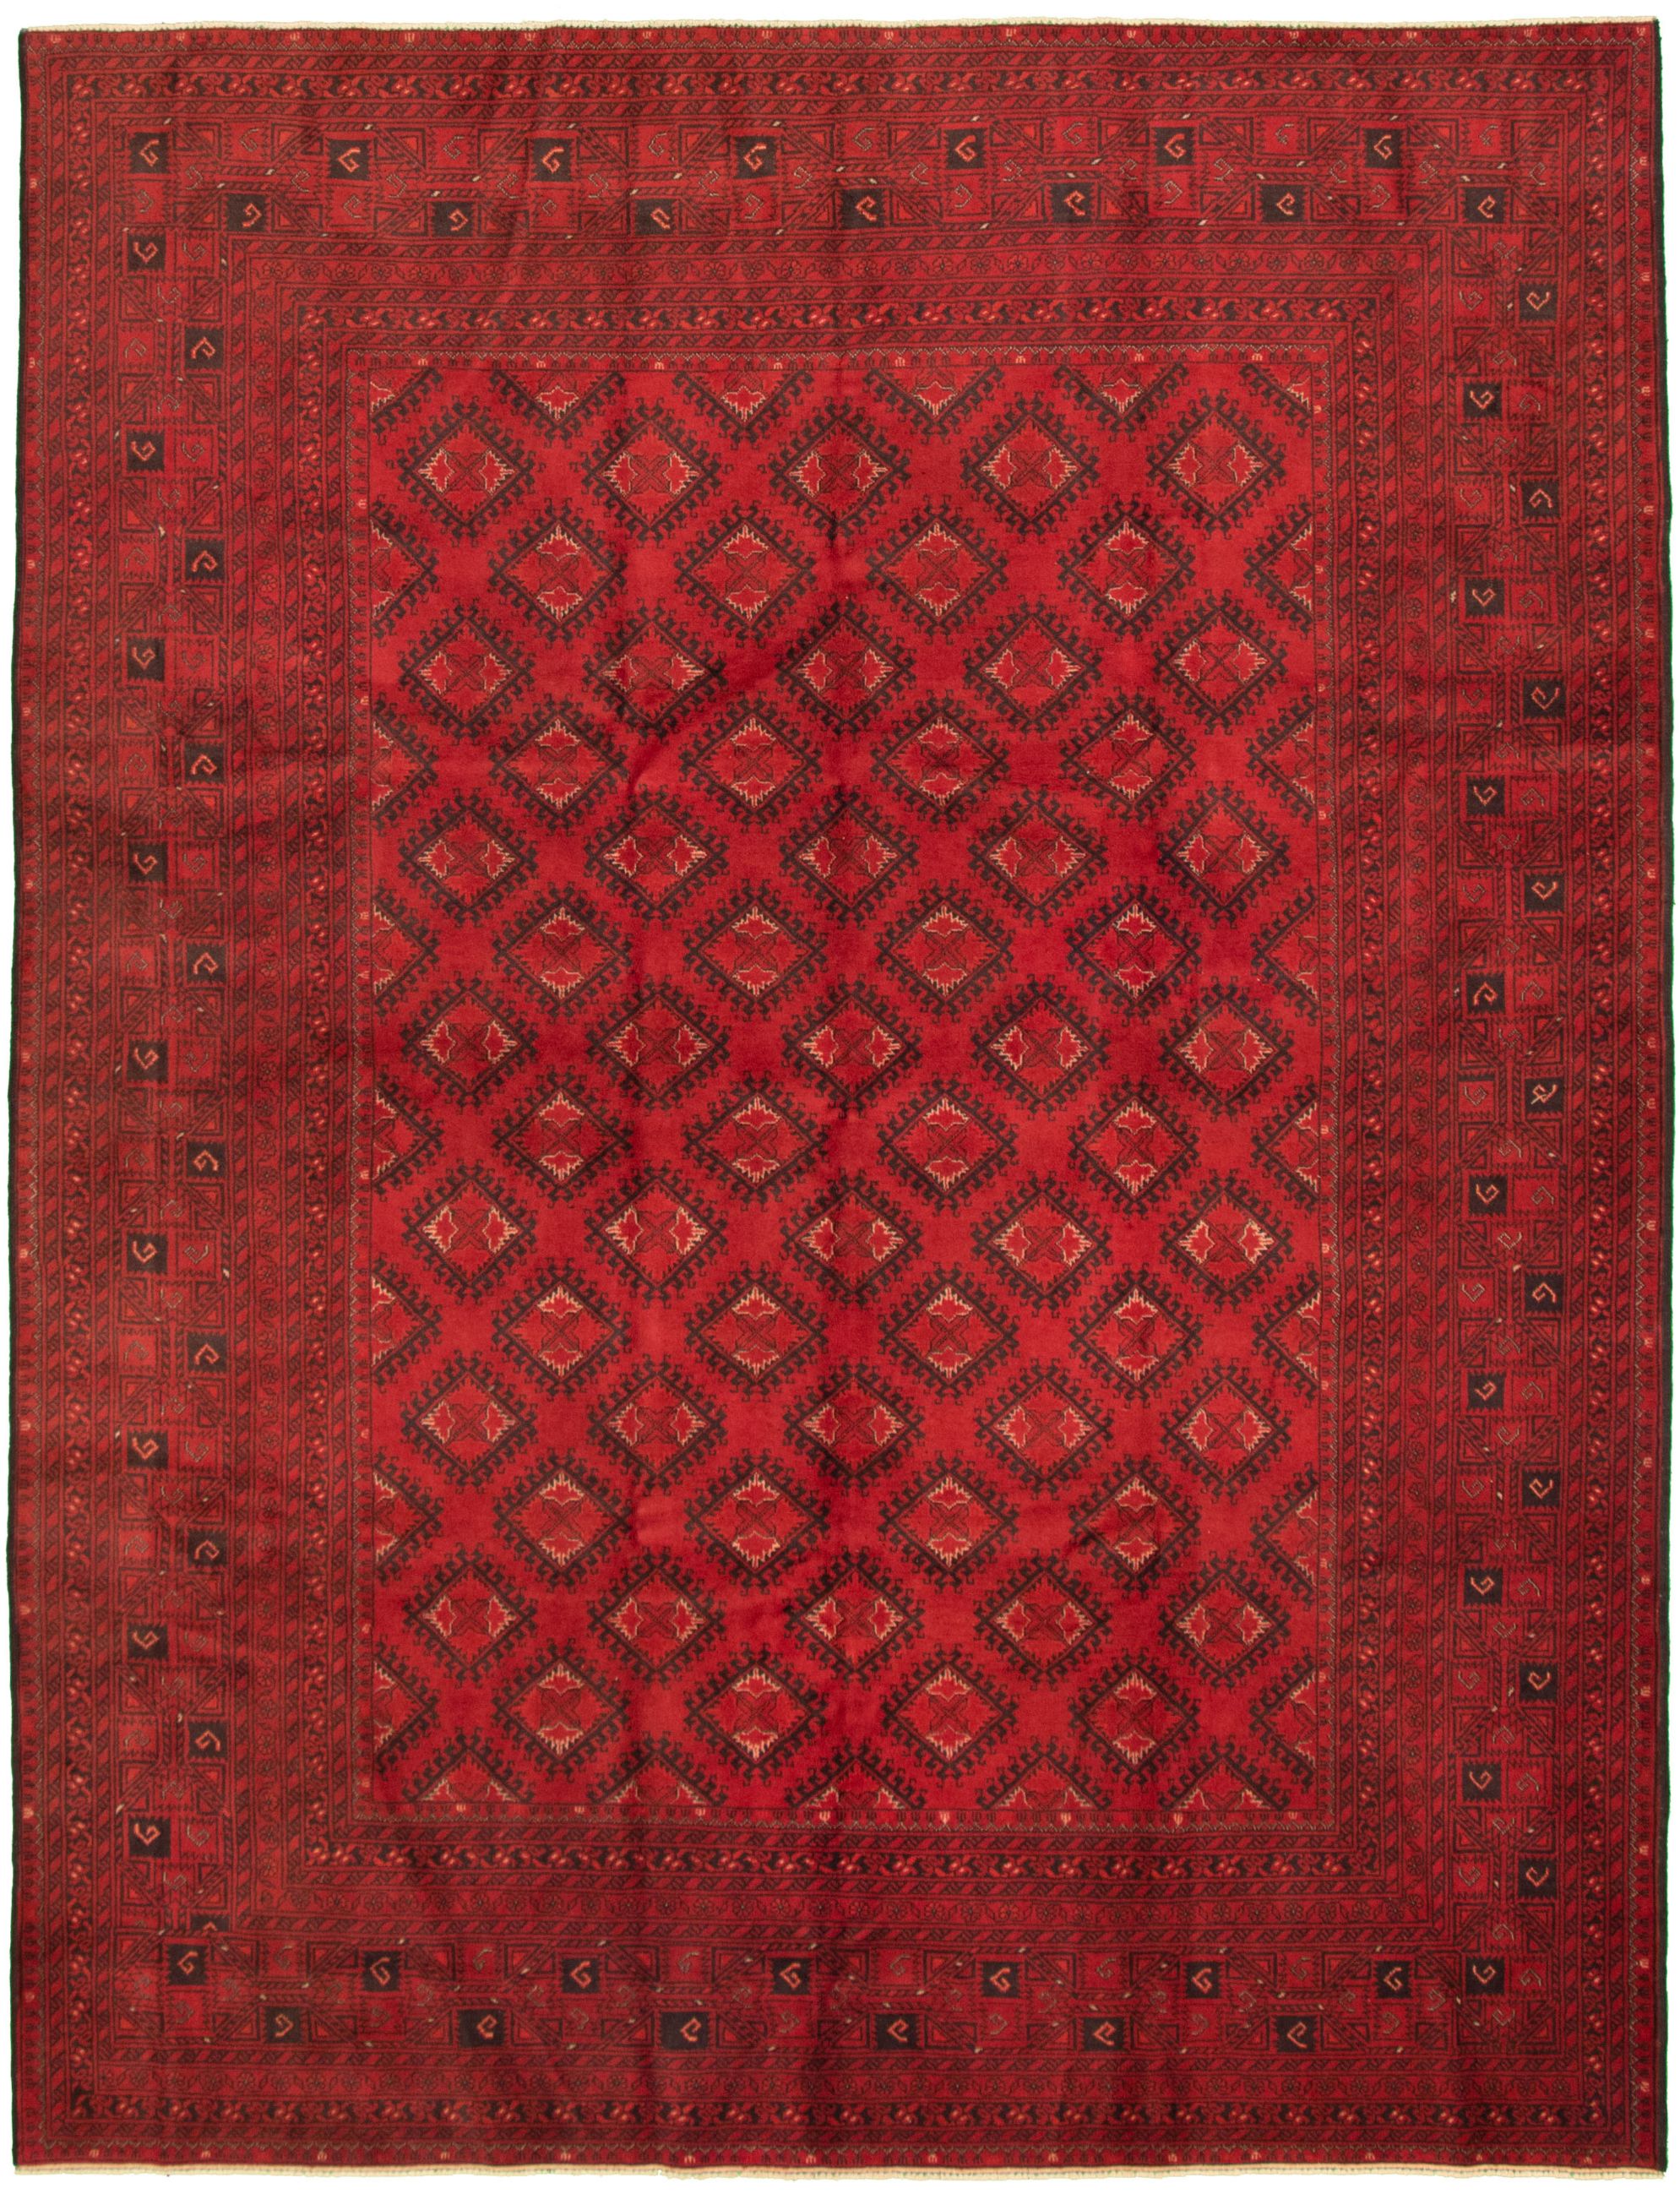 Hand-knotted Khal Mohammadi Red Wool Rug 8'2" x 10'10"  Size: 8'2" x 10'10"  